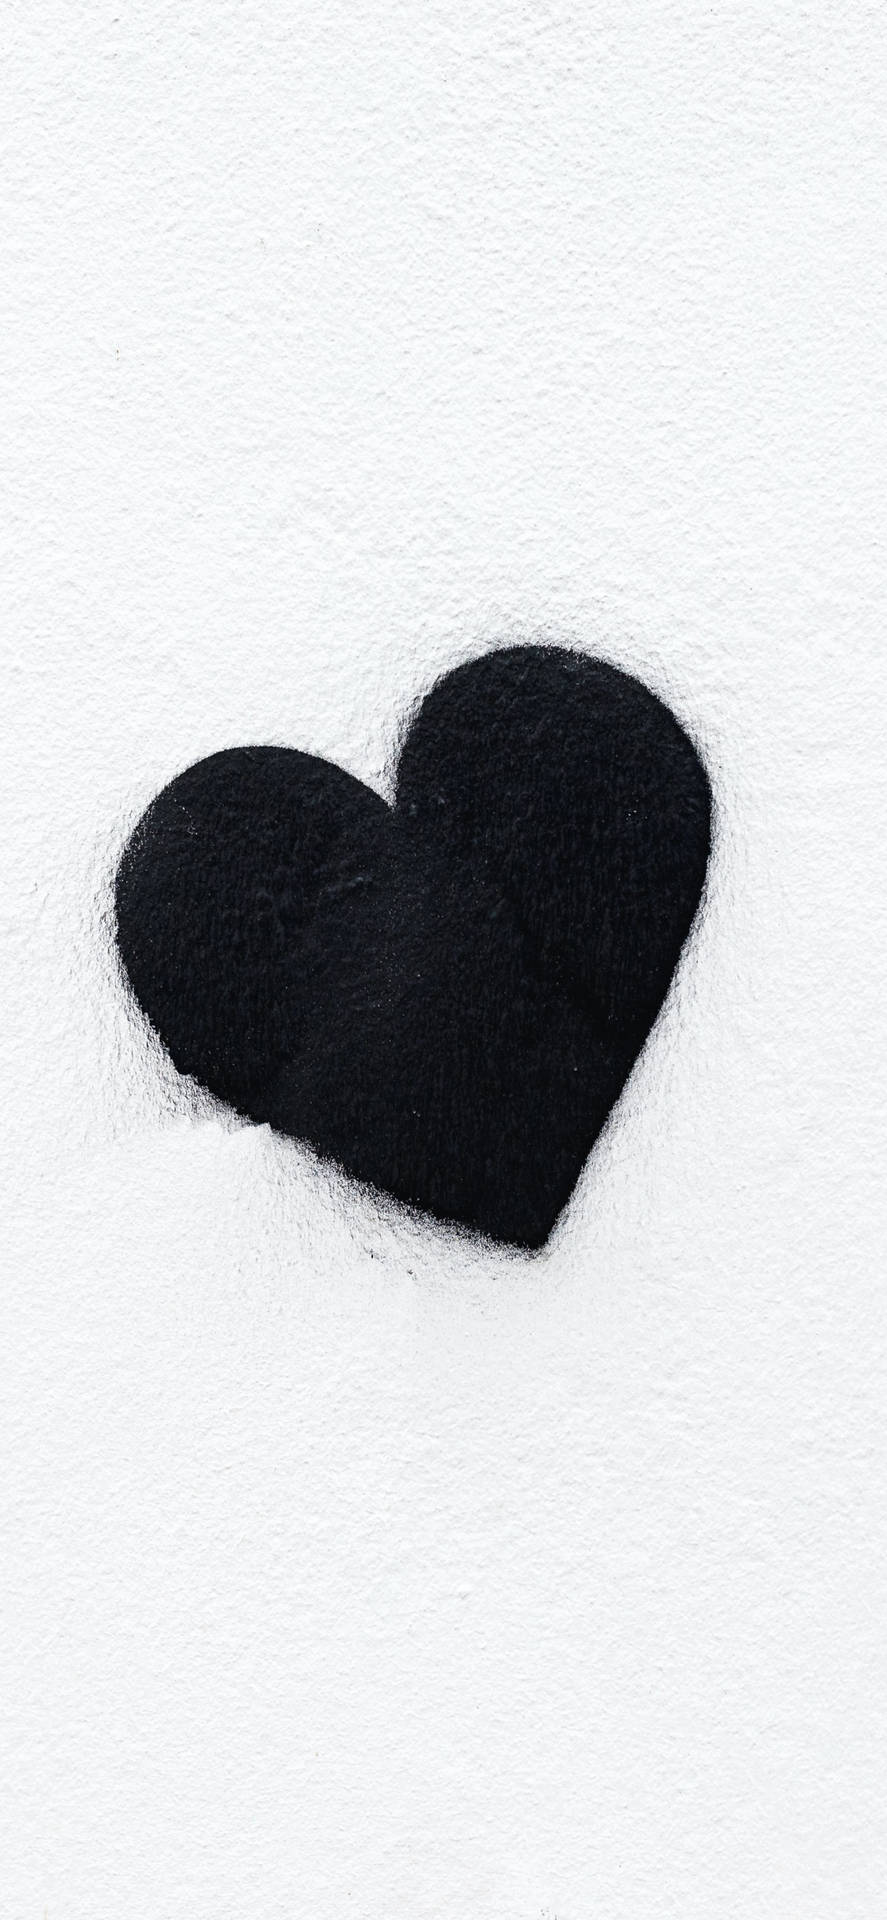 Black Heart Aesthetic Painted On A Wall Background